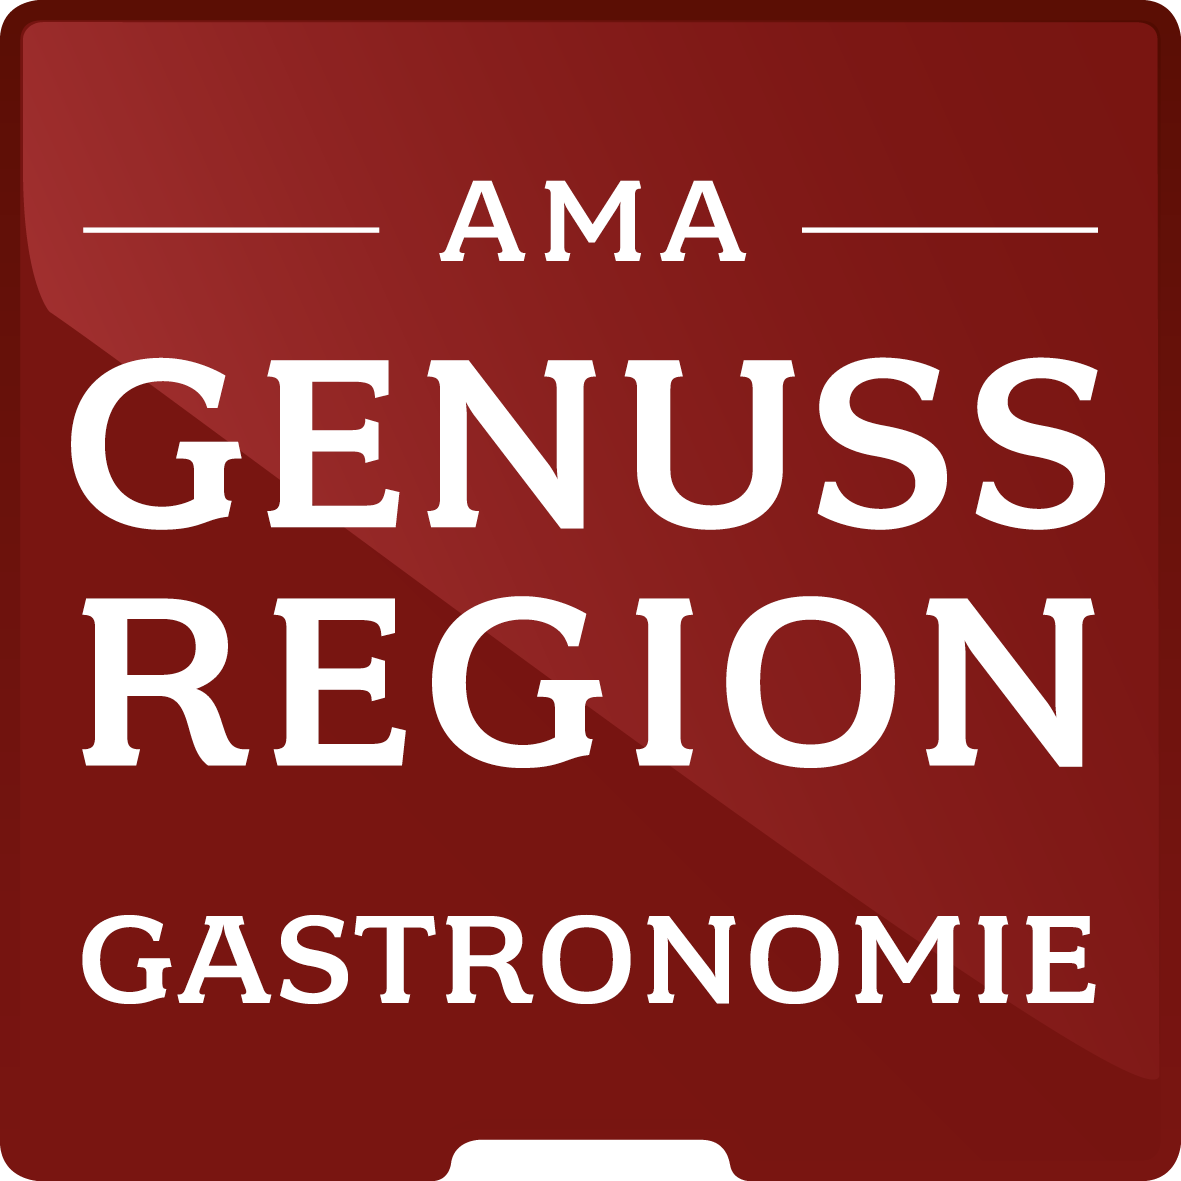 We have been awarded the AMA seal of gastronomic excellence. 